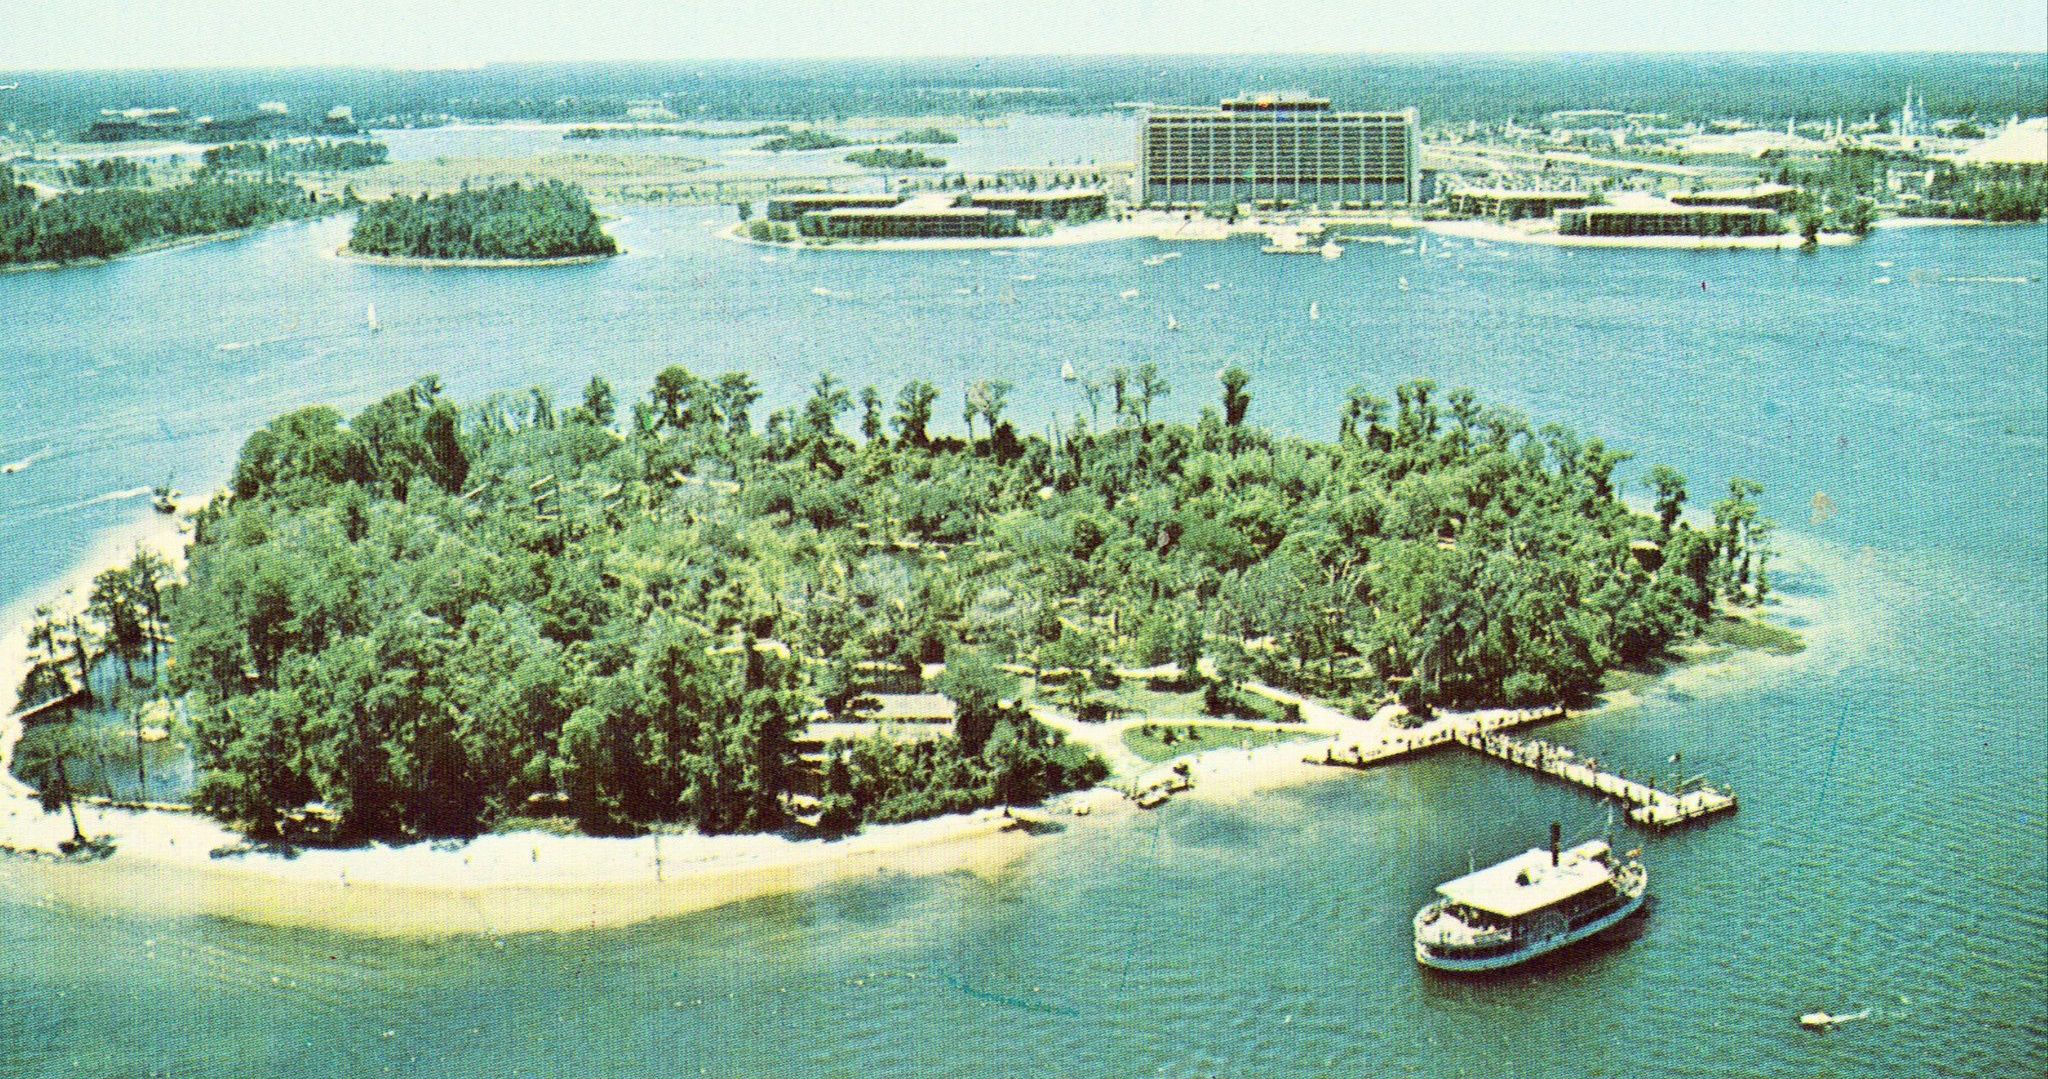 Man Camps Out at Disney World's Discovery Island and Gets Arrested